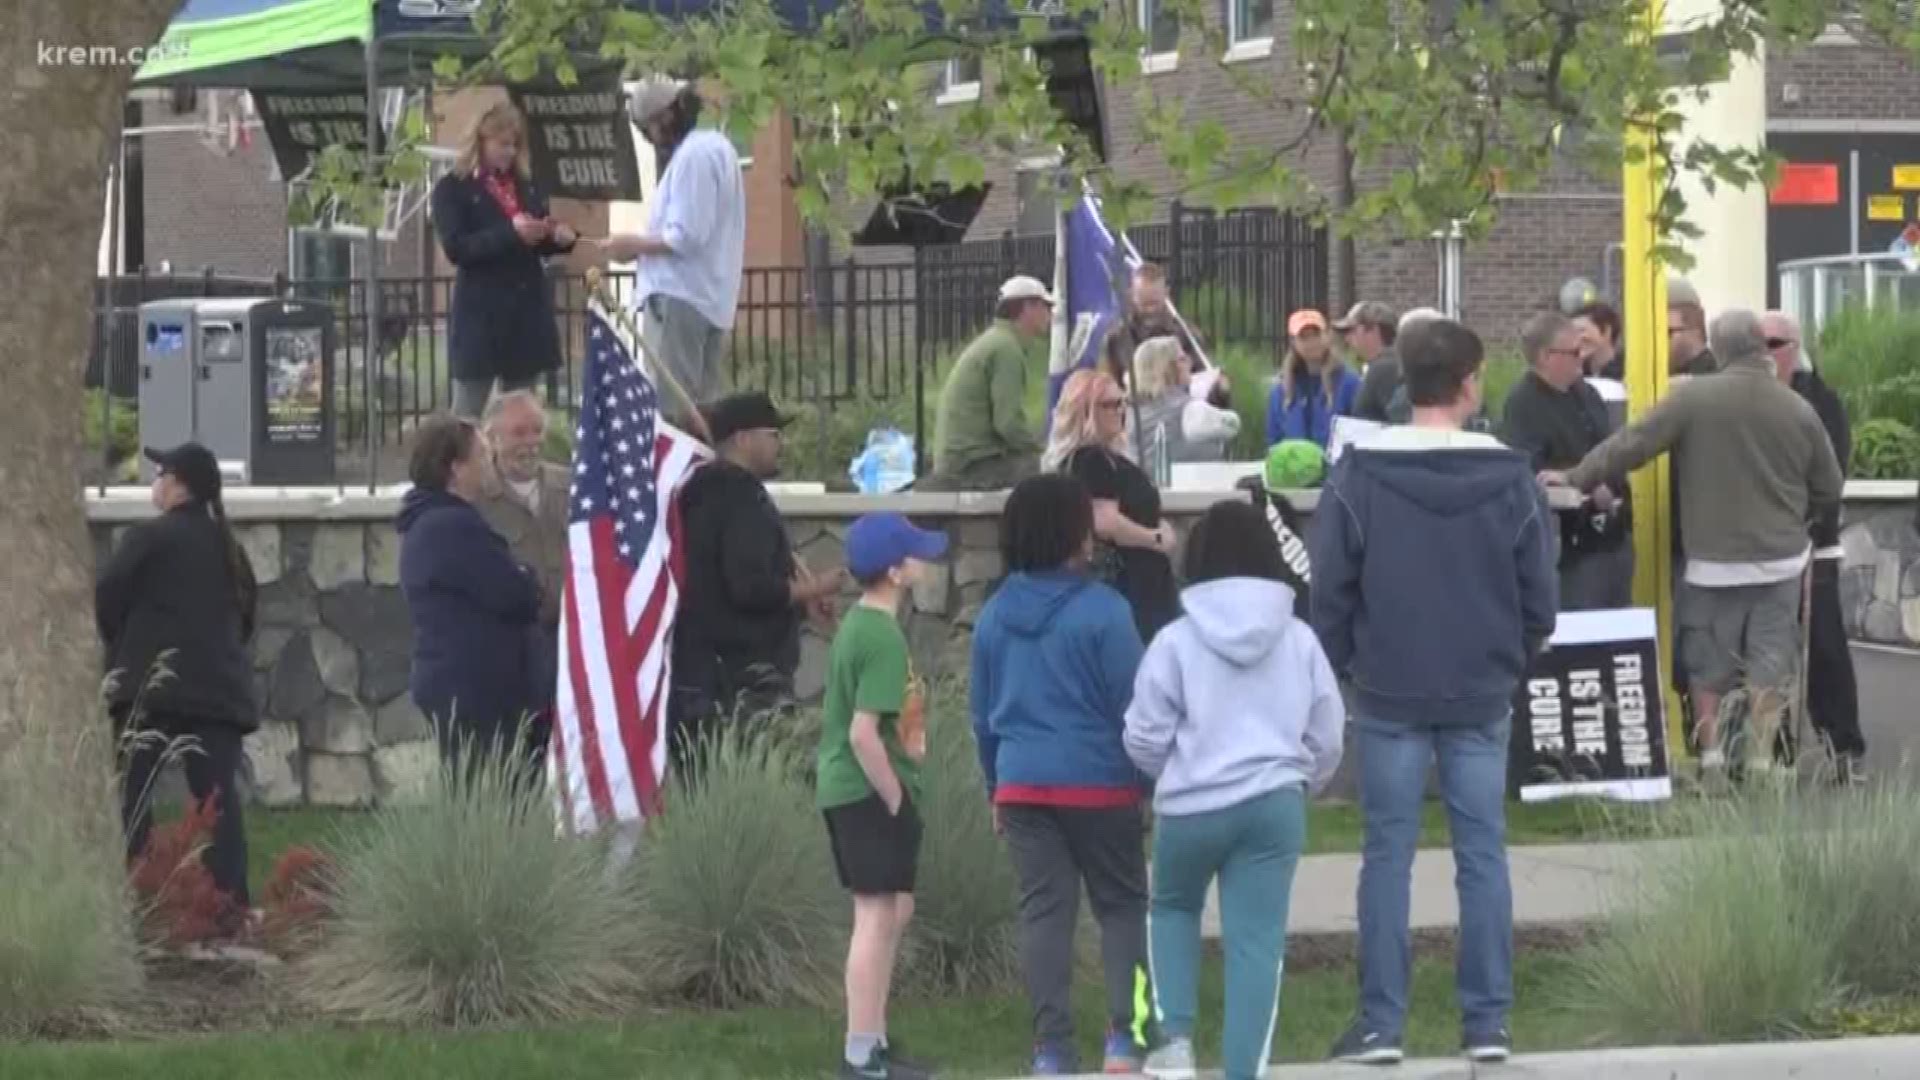 Protesters were chanting, "Freedom is the cure," hearkening back to a rally held at the Spokane County Courthouse in protest of the stay-home order on May Day.